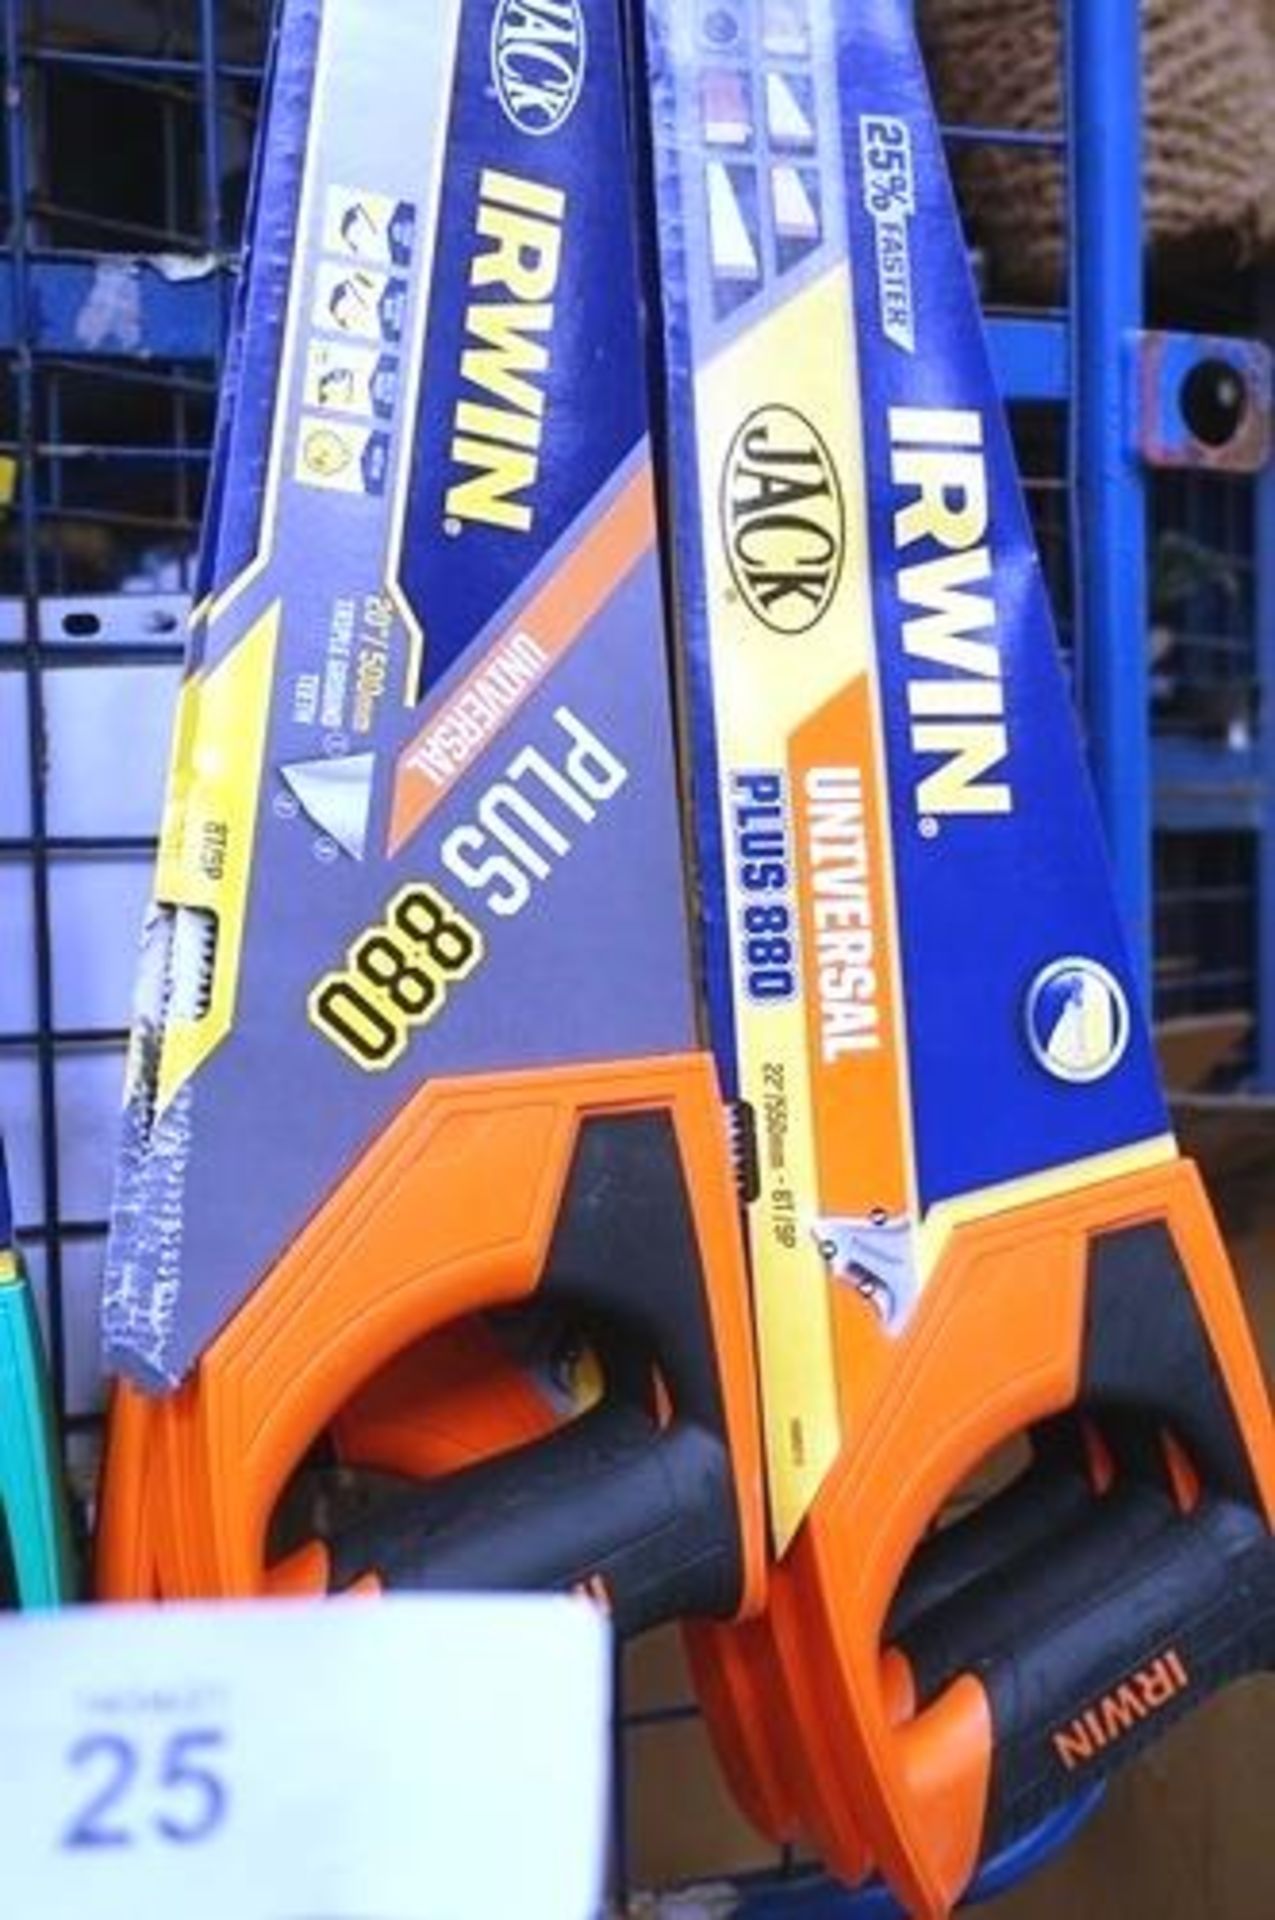 10 x Irwin handsaws including Universal Plus 880, Coarse Plus 770, together with 1 x Bahco 244+ - Image 2 of 3